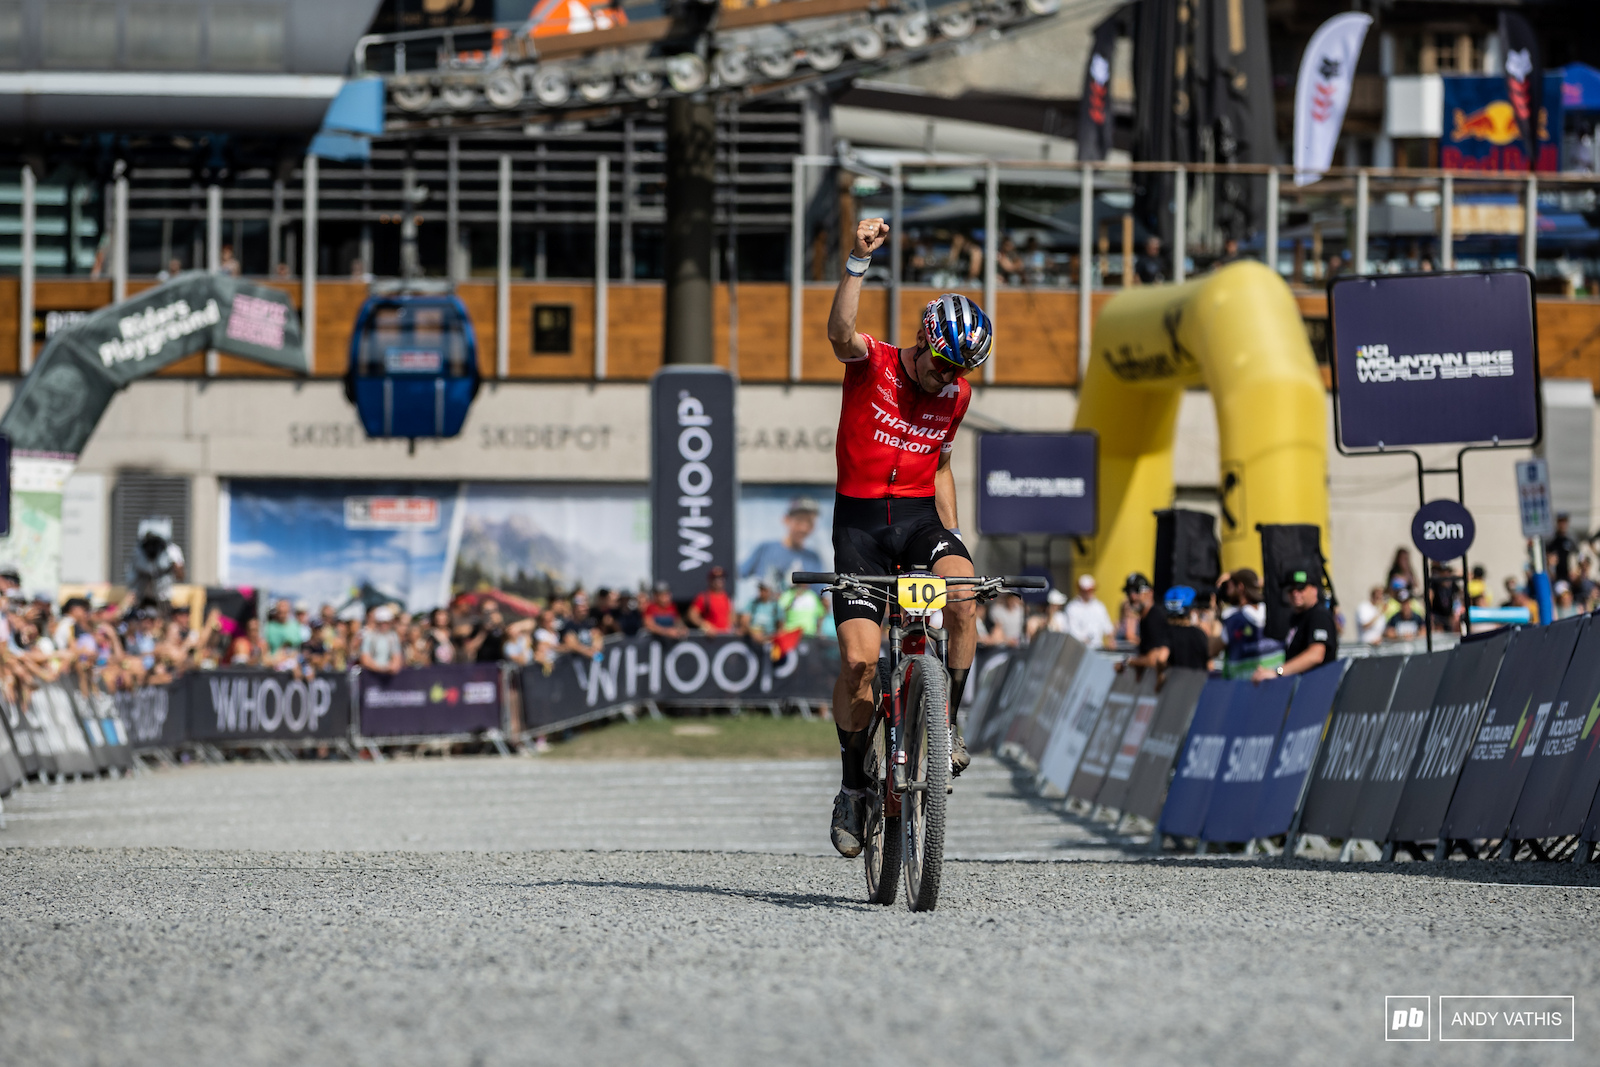 After an incredible ride Lars Forster takes the win in Leogang.